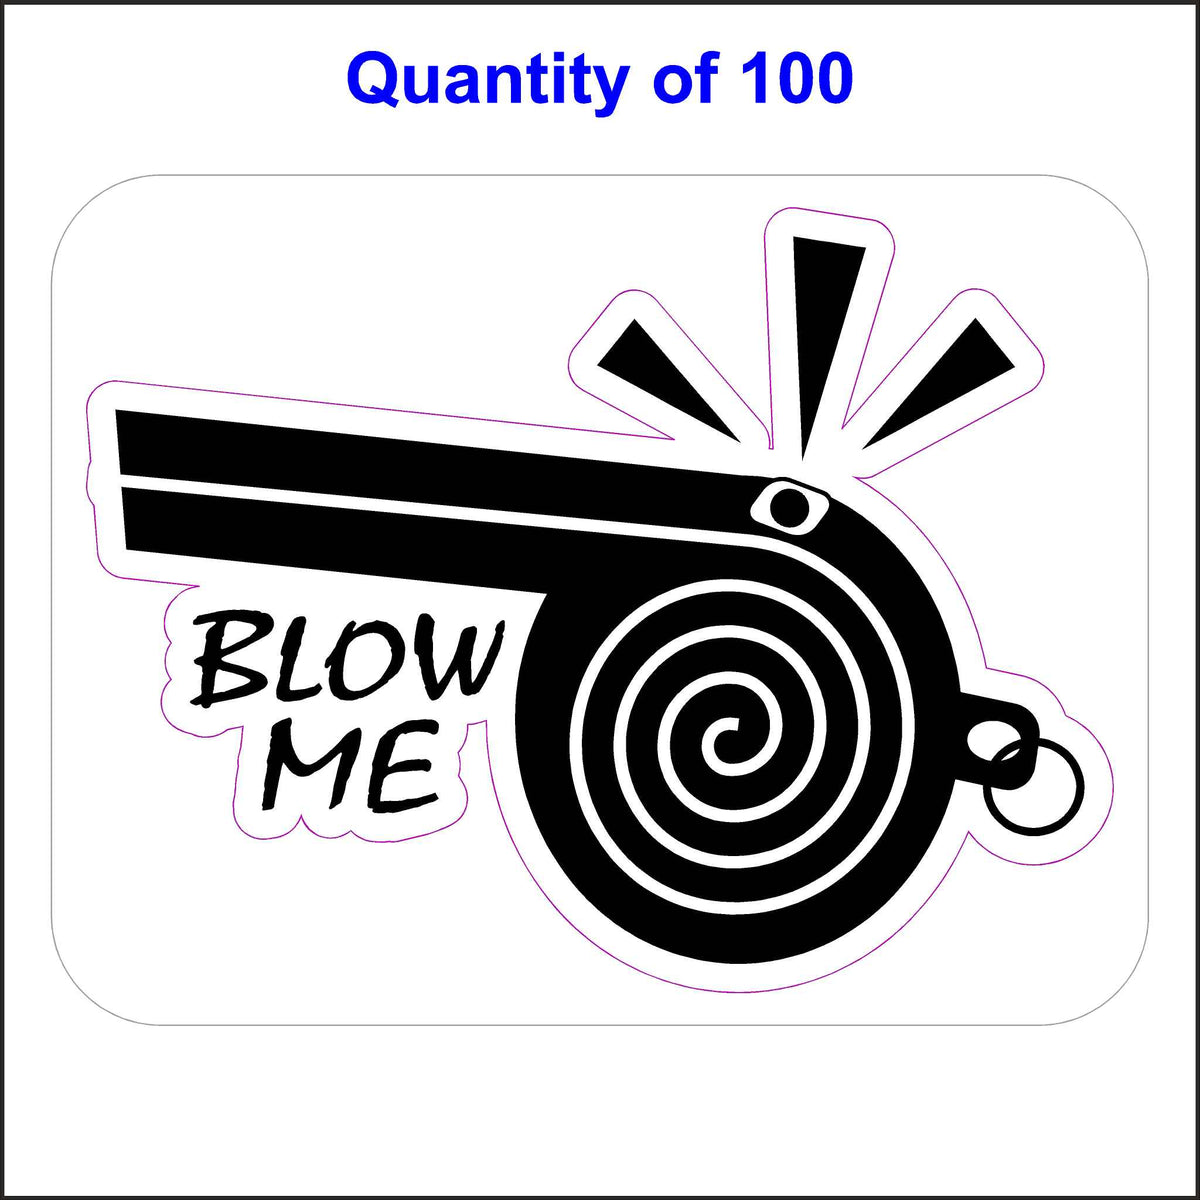 Whistle Blower Sticker, Blow Me Stickers. Black Whistle and the Words Blow Me on a White Background. 100 Quantity.